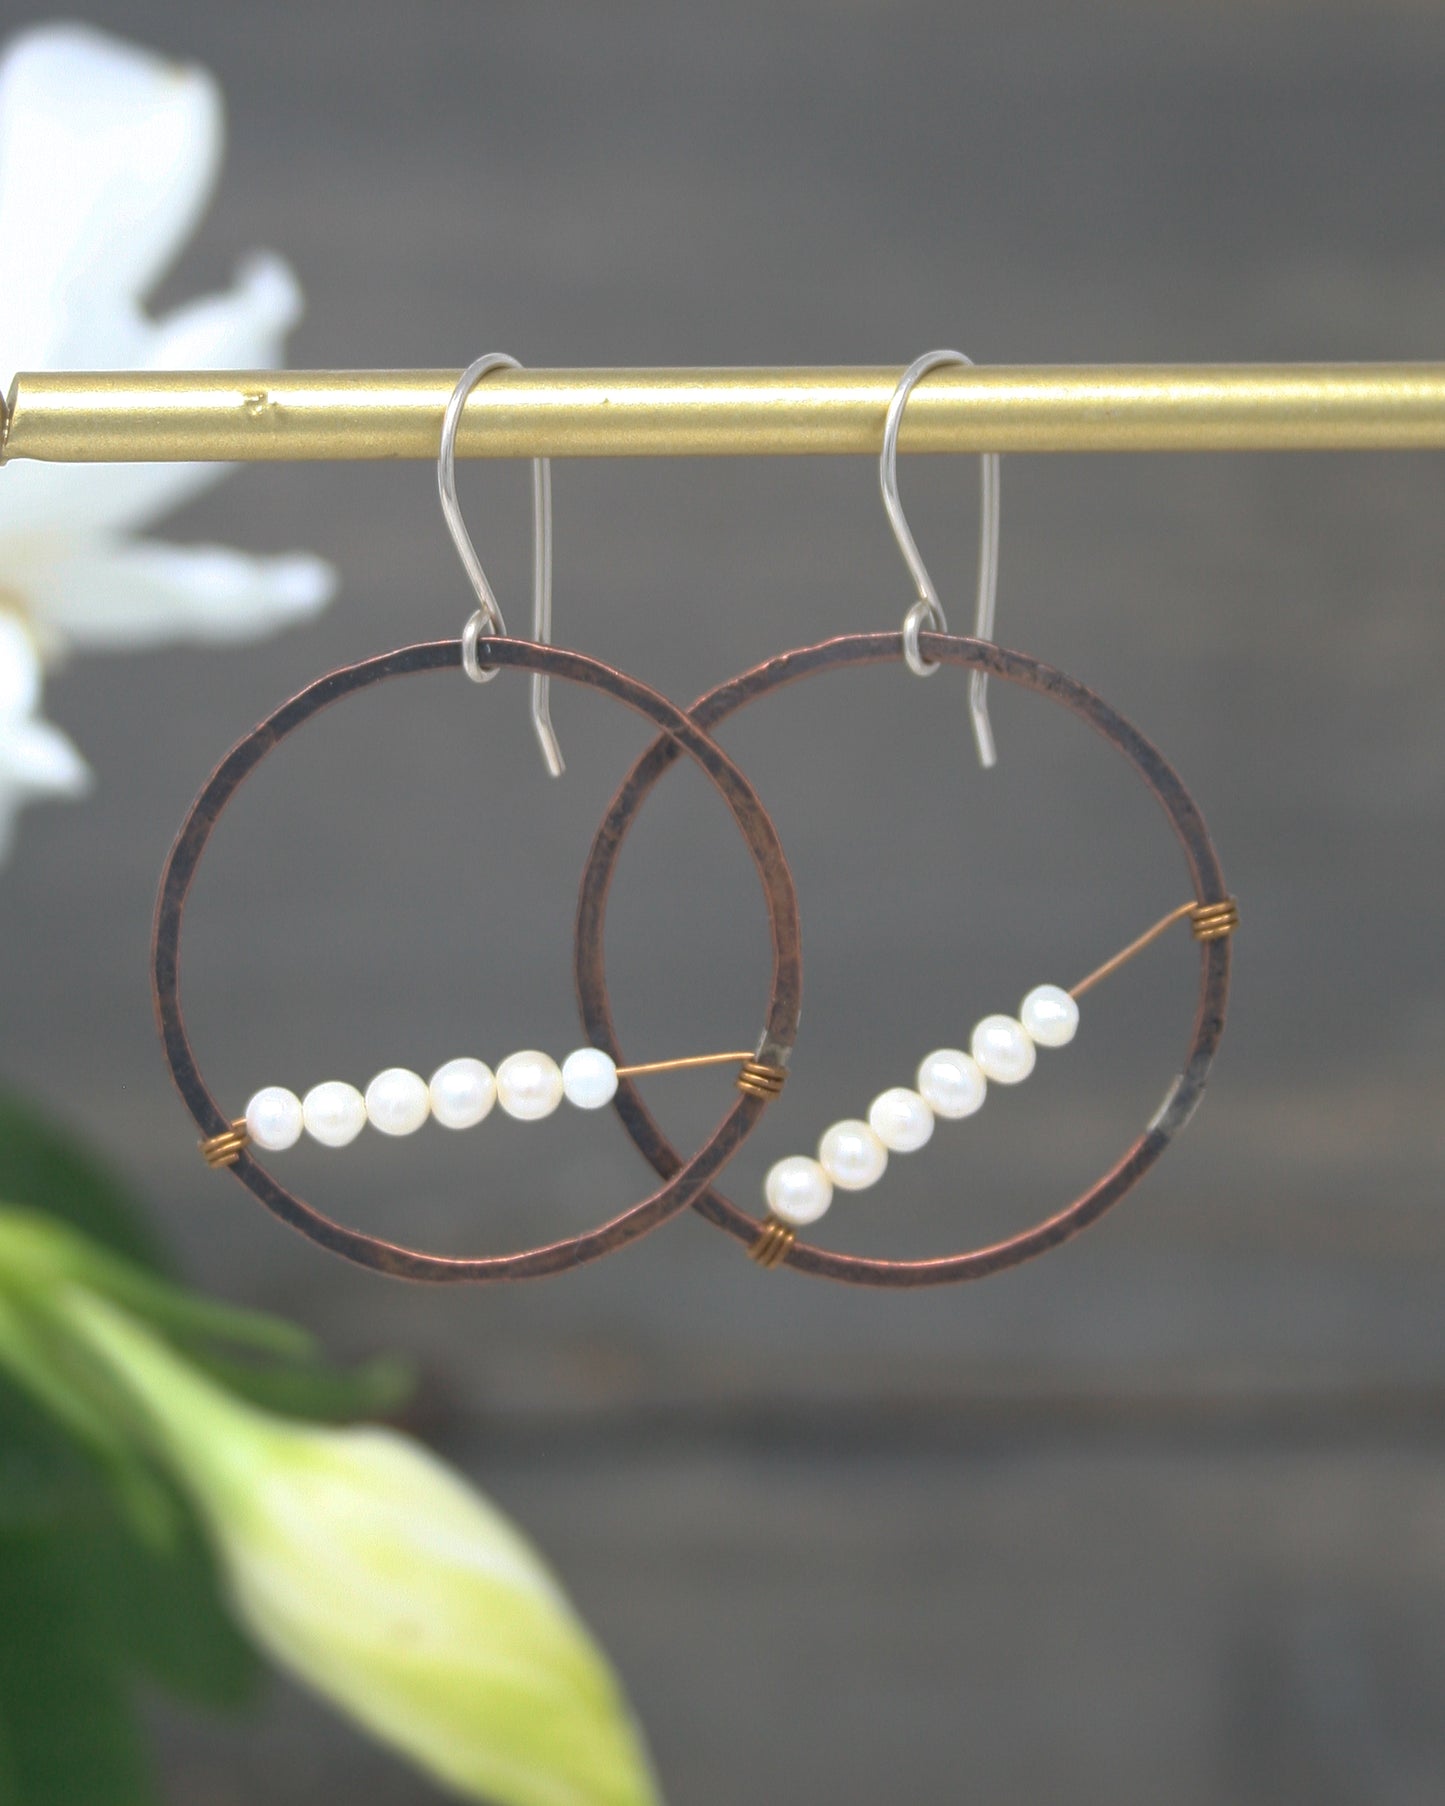 a pair of earrings with pearls hanging from a hook